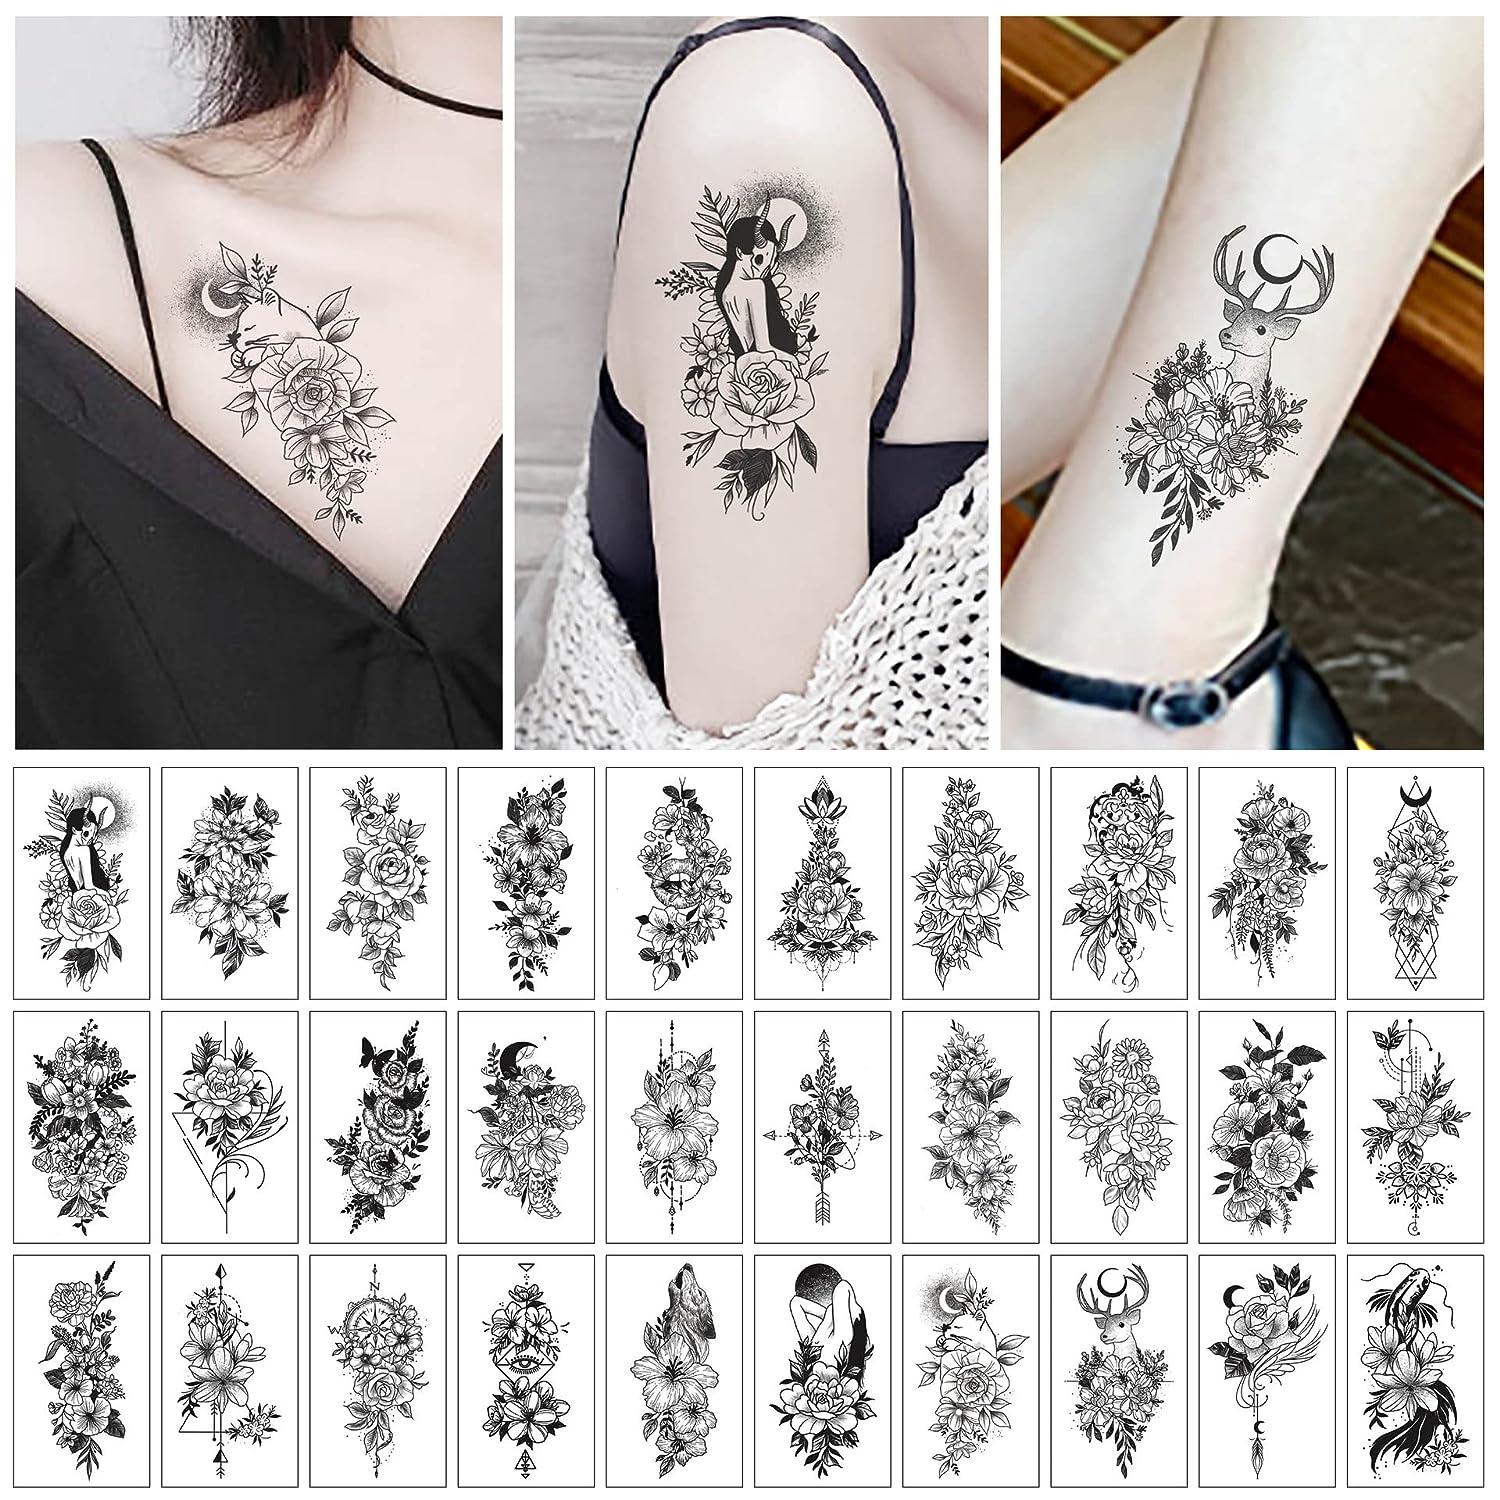 Amazon.com : Kotbs 18 Sheets Realistic Temporary Tattoo, Tiny Branch Black  Flower Temporary Tattoos for Women Girls Kids, Bouquet Small Tattoo  Temporary Sticker Wild Plant Floral Fake Tattoos : Beauty & Personal Care